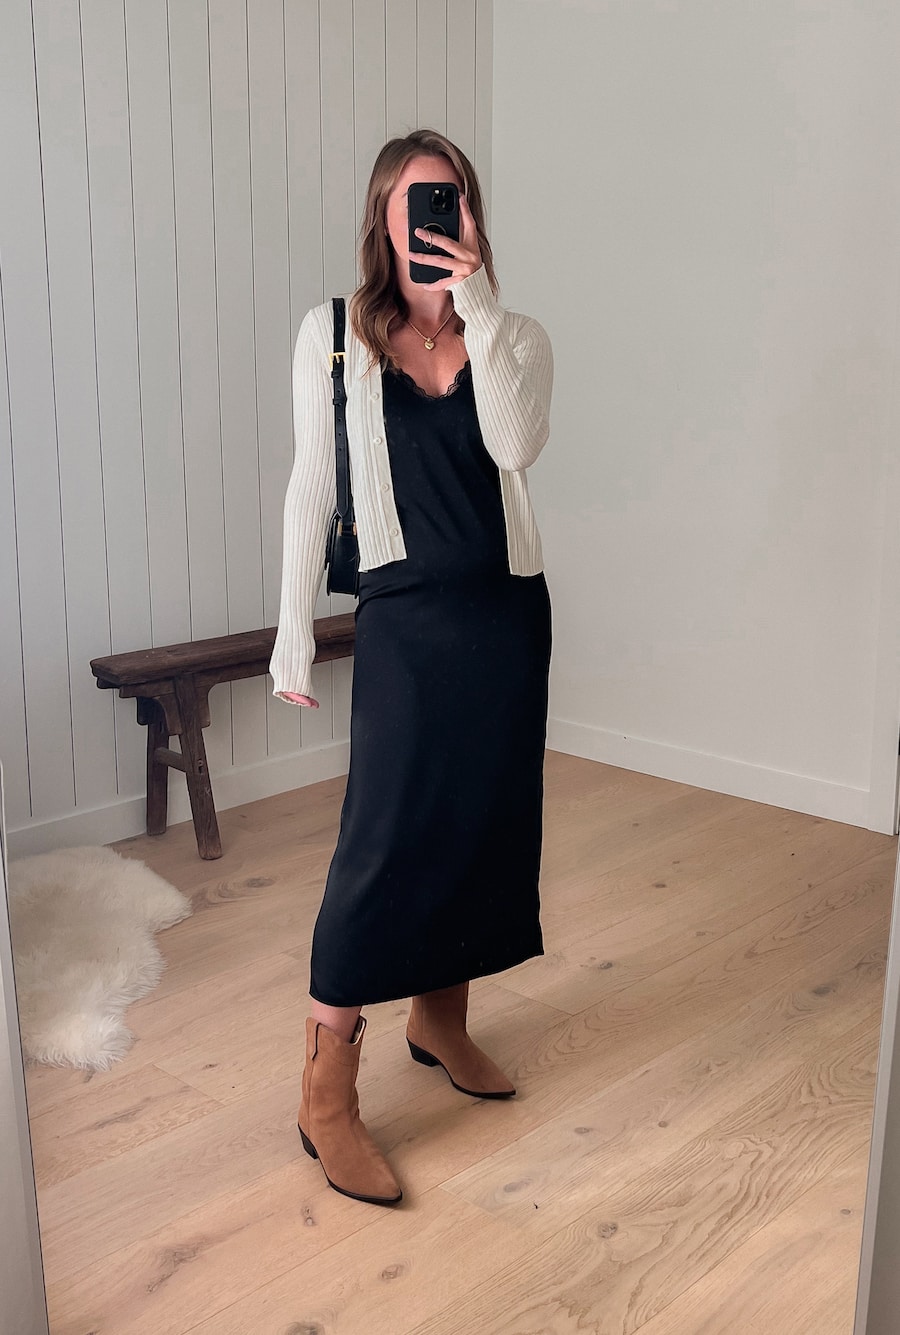 woman wearing a long black slip dress with brown western style boots and a knit ivory cardigan